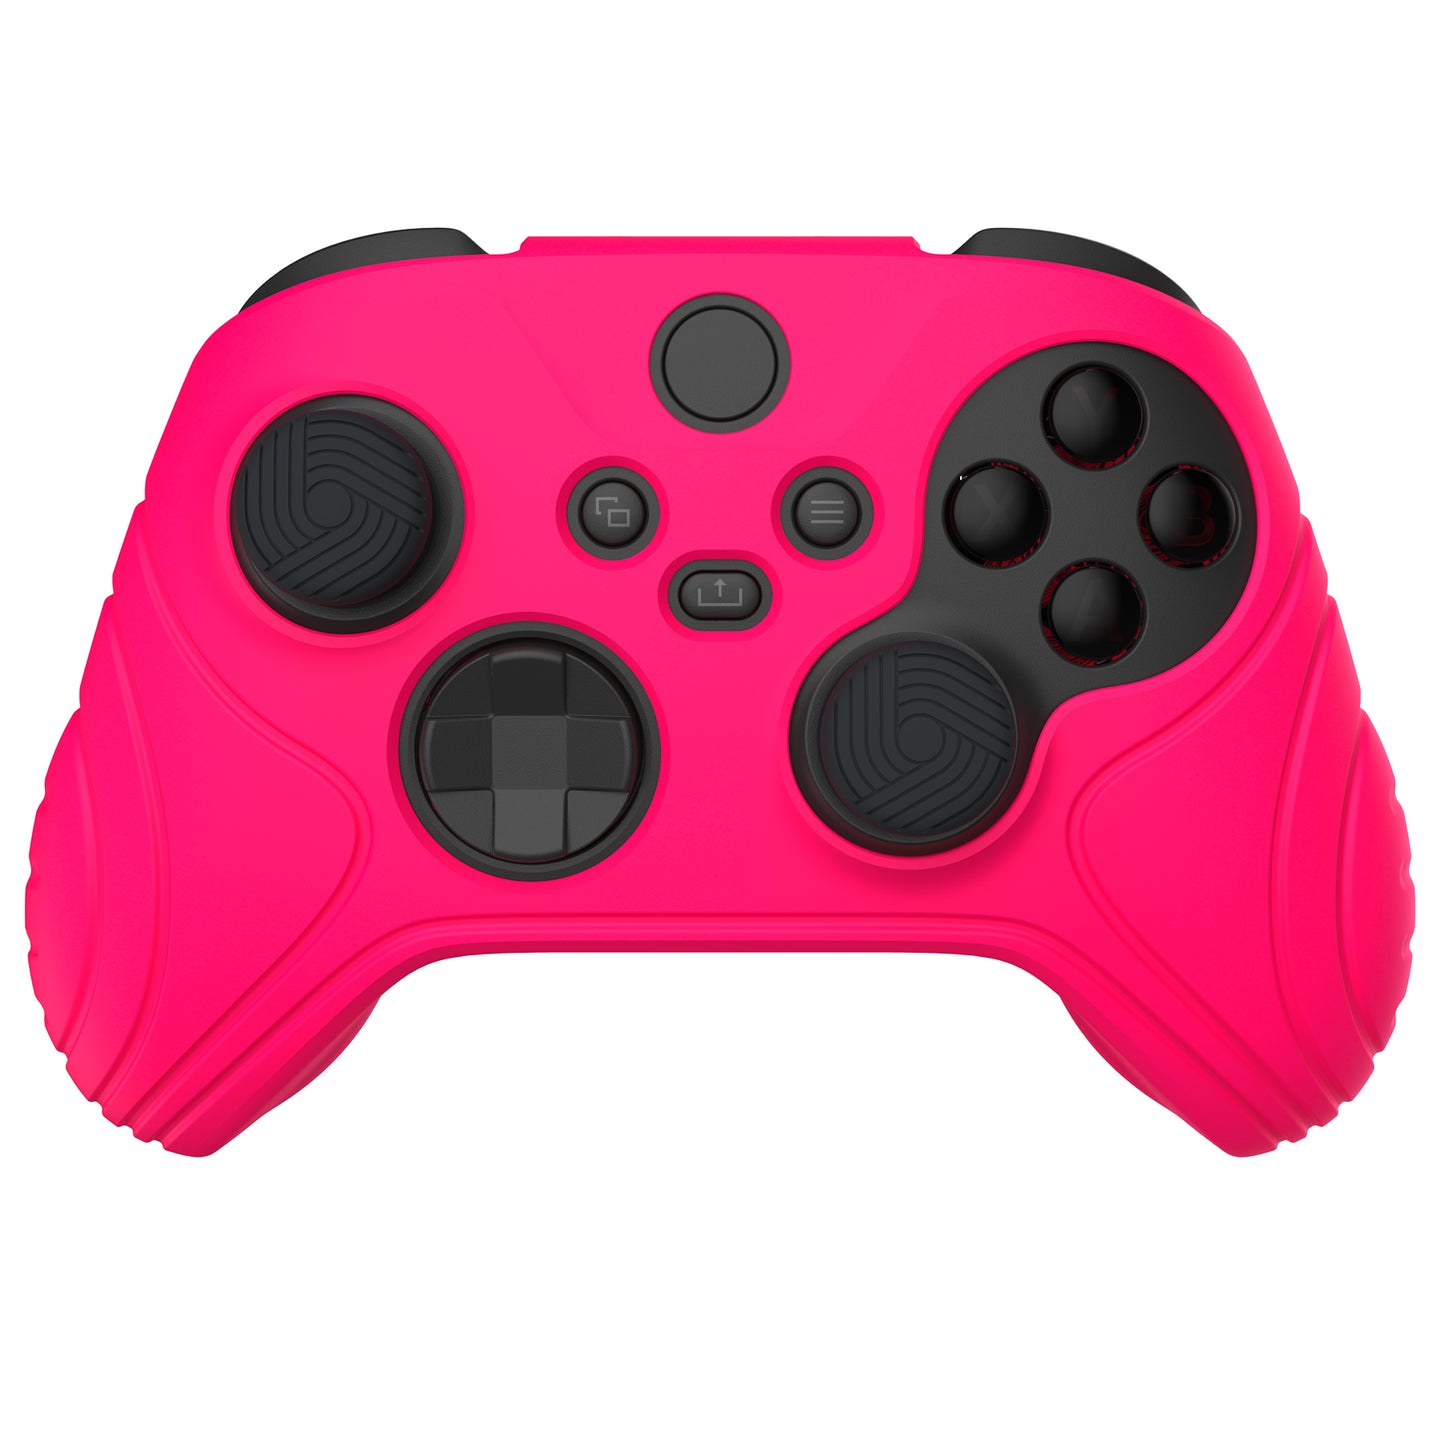 PlayVital Samurai Edition Bright Pink Anti-slip Controller Grip Silicone Skin, Ergonomic Soft Rubber Protective Case Cover for Xbox Series S/X Controller with Black Thumb Stick Caps - WAX3019 PlayVital